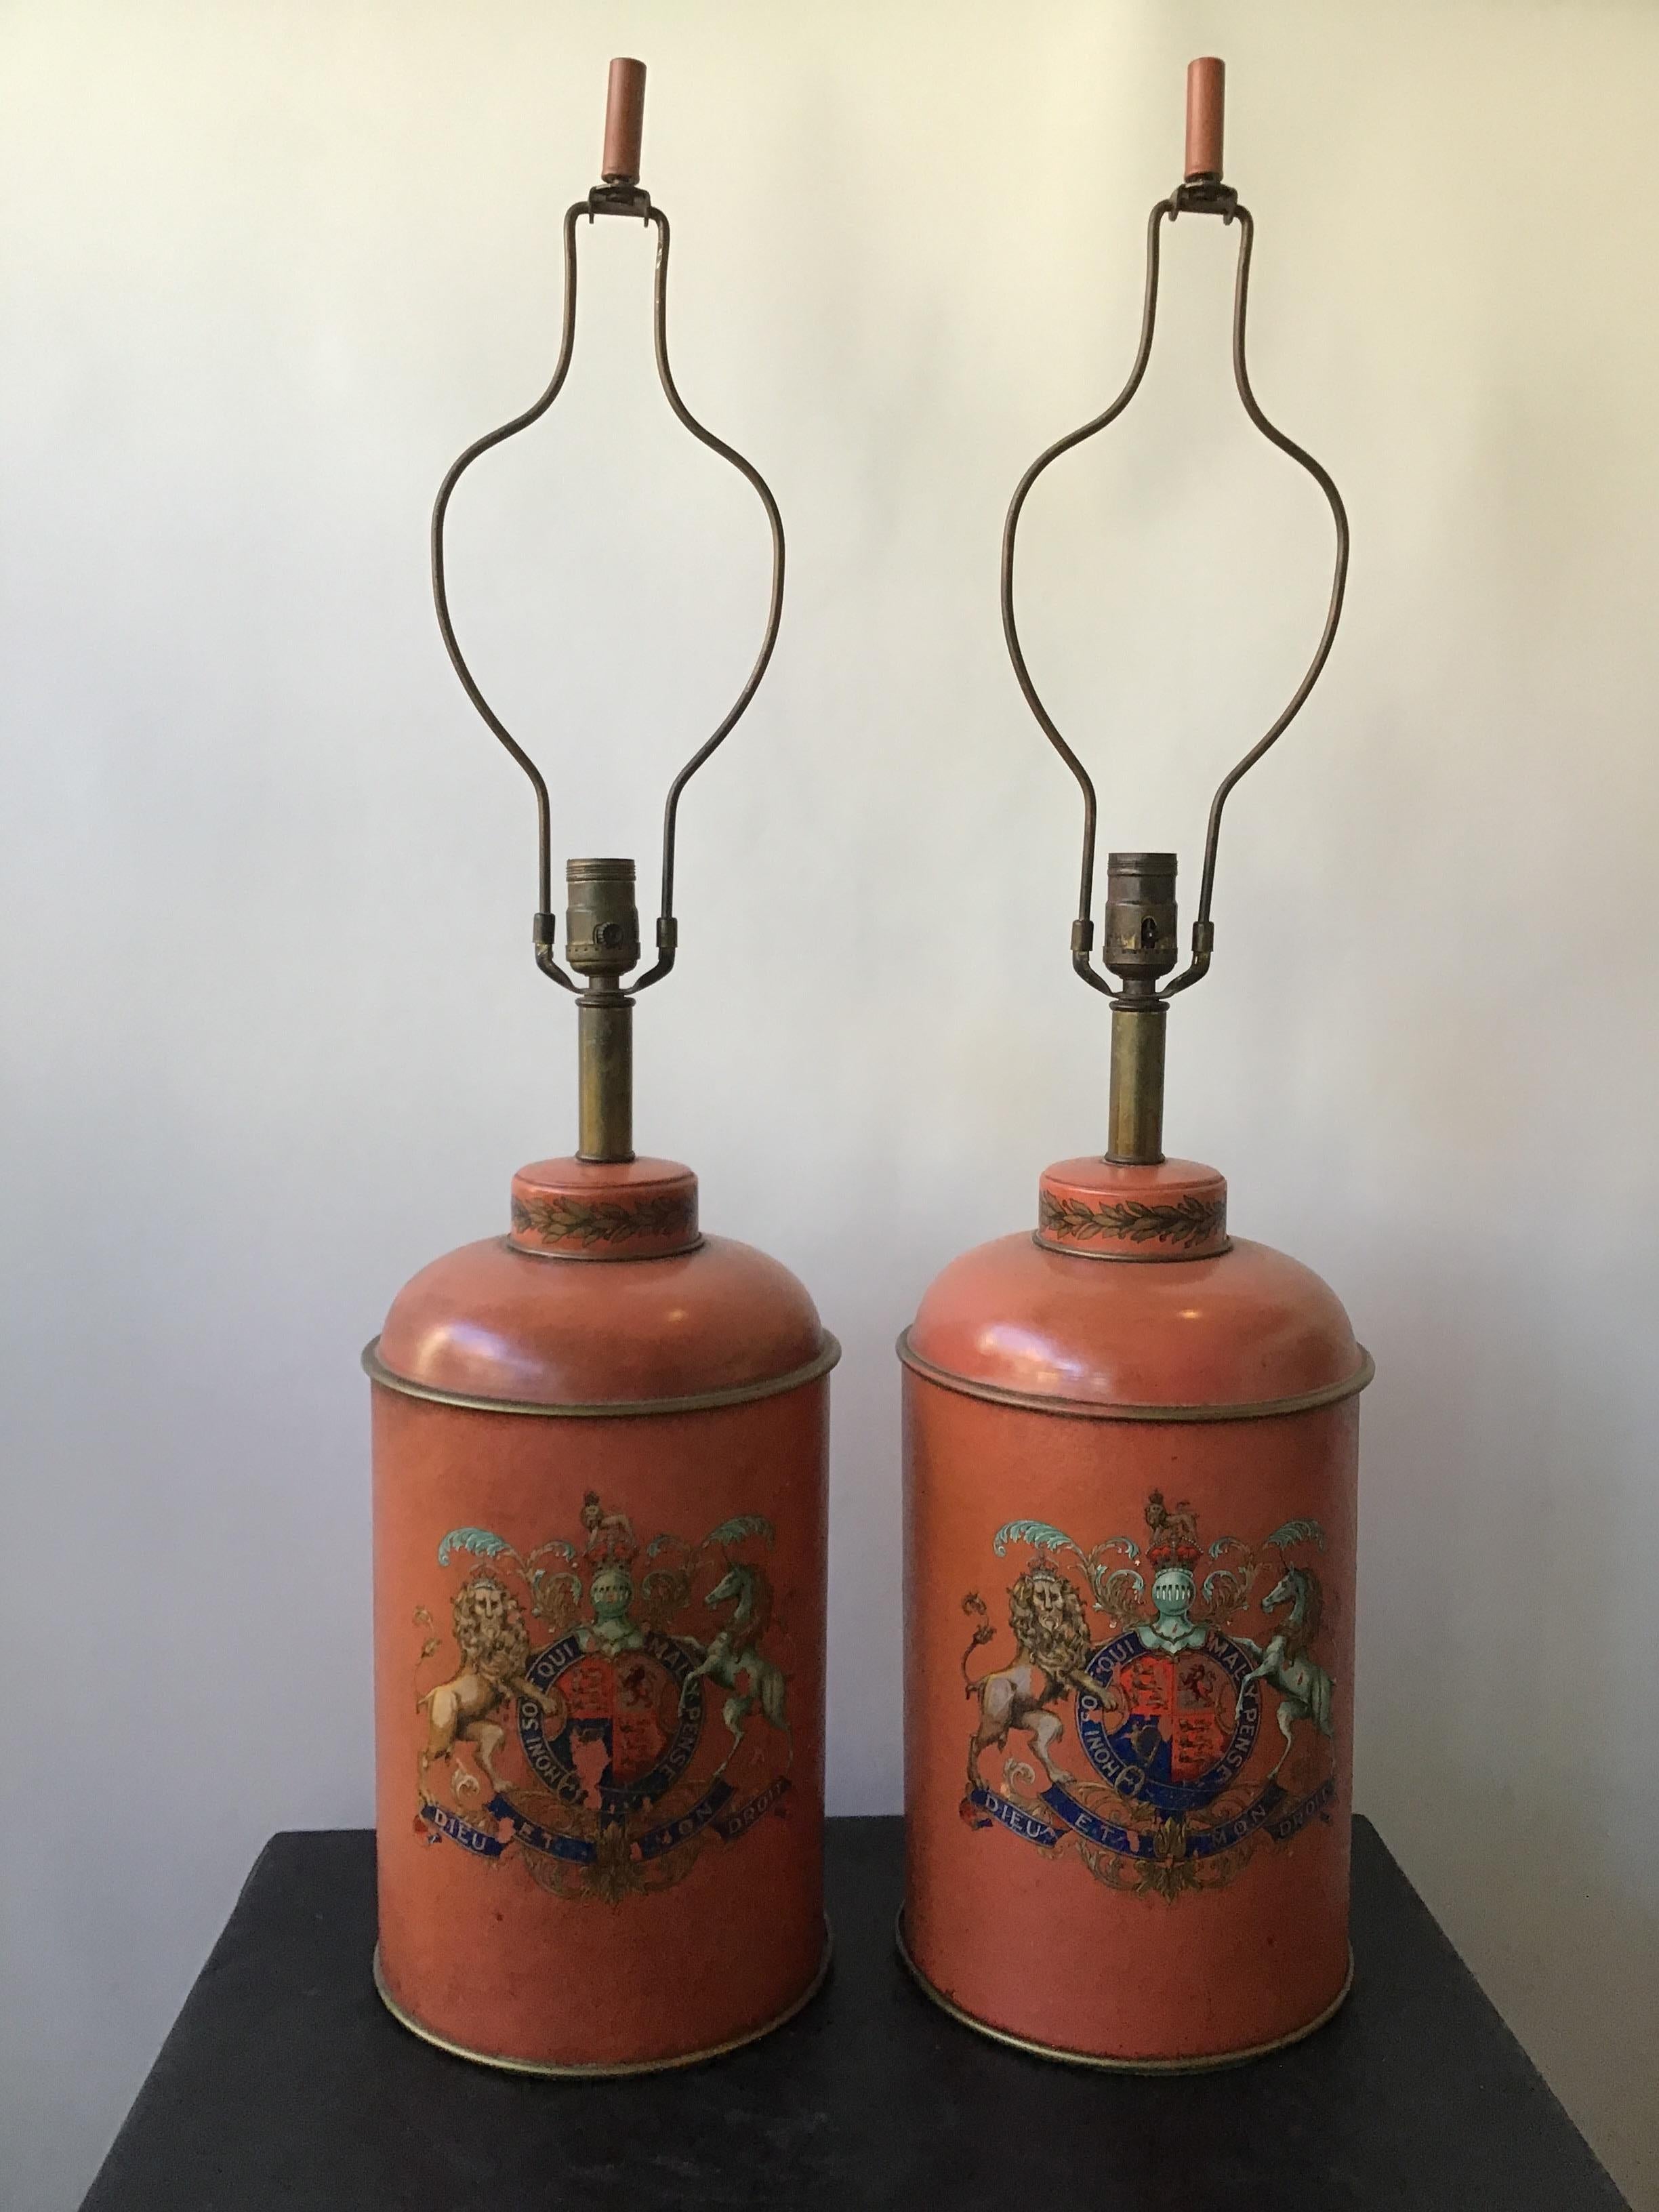 Pair of 1940s French Leather lamps with a crest that reads, Honi so it qui mal y Penske. This translates to, shame on anyone who thinks evil of it. Used as the motto of the British chivalric Order of the Garter.